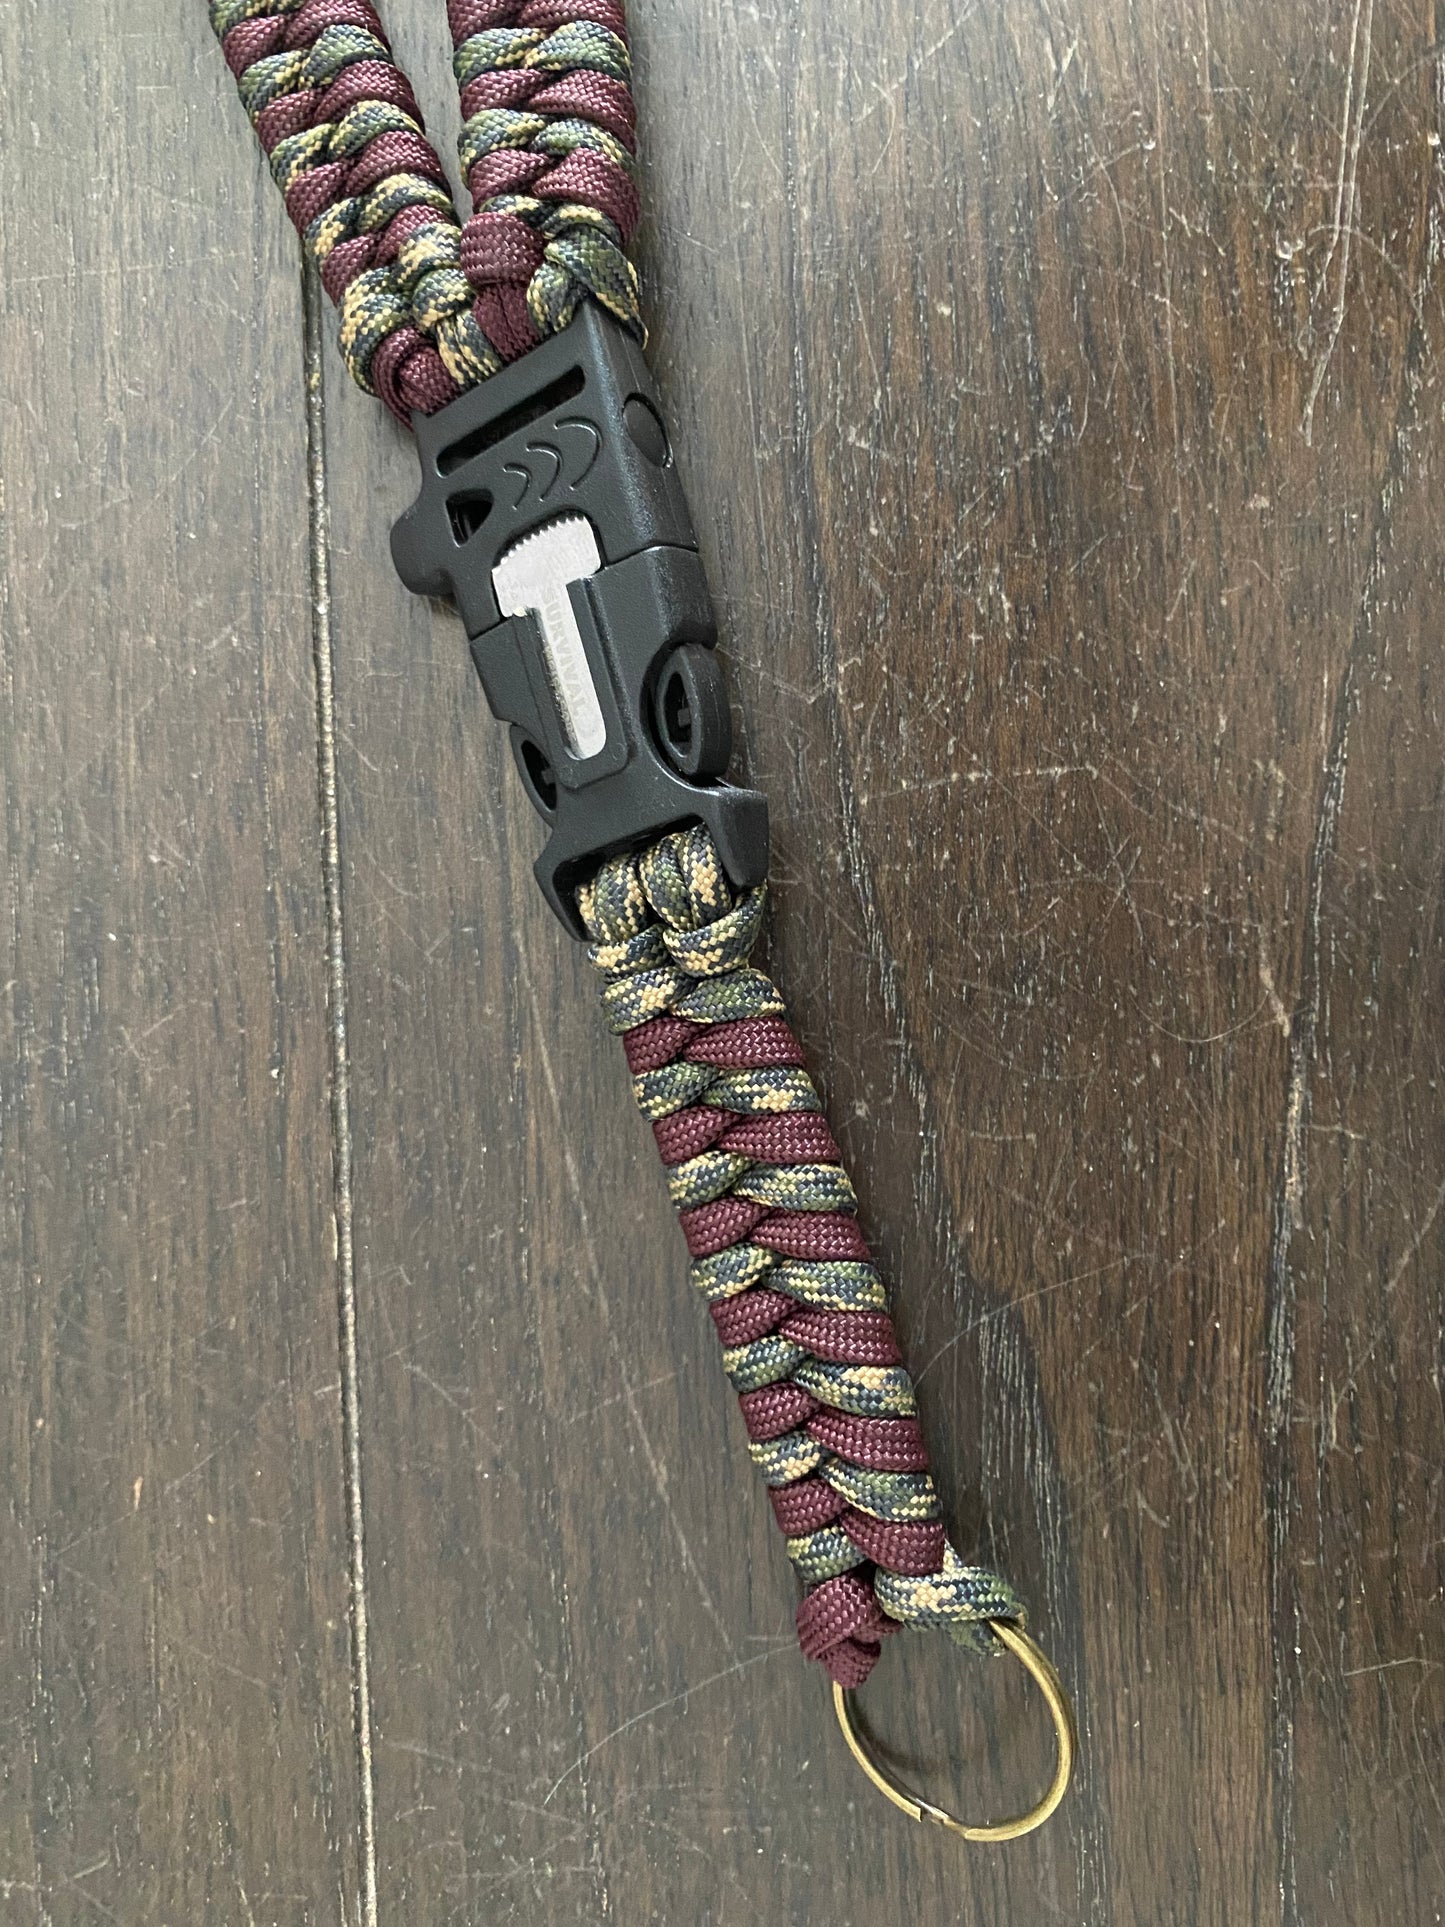 Premade Paracord Fishtail Lanyard, maroon and forest camo